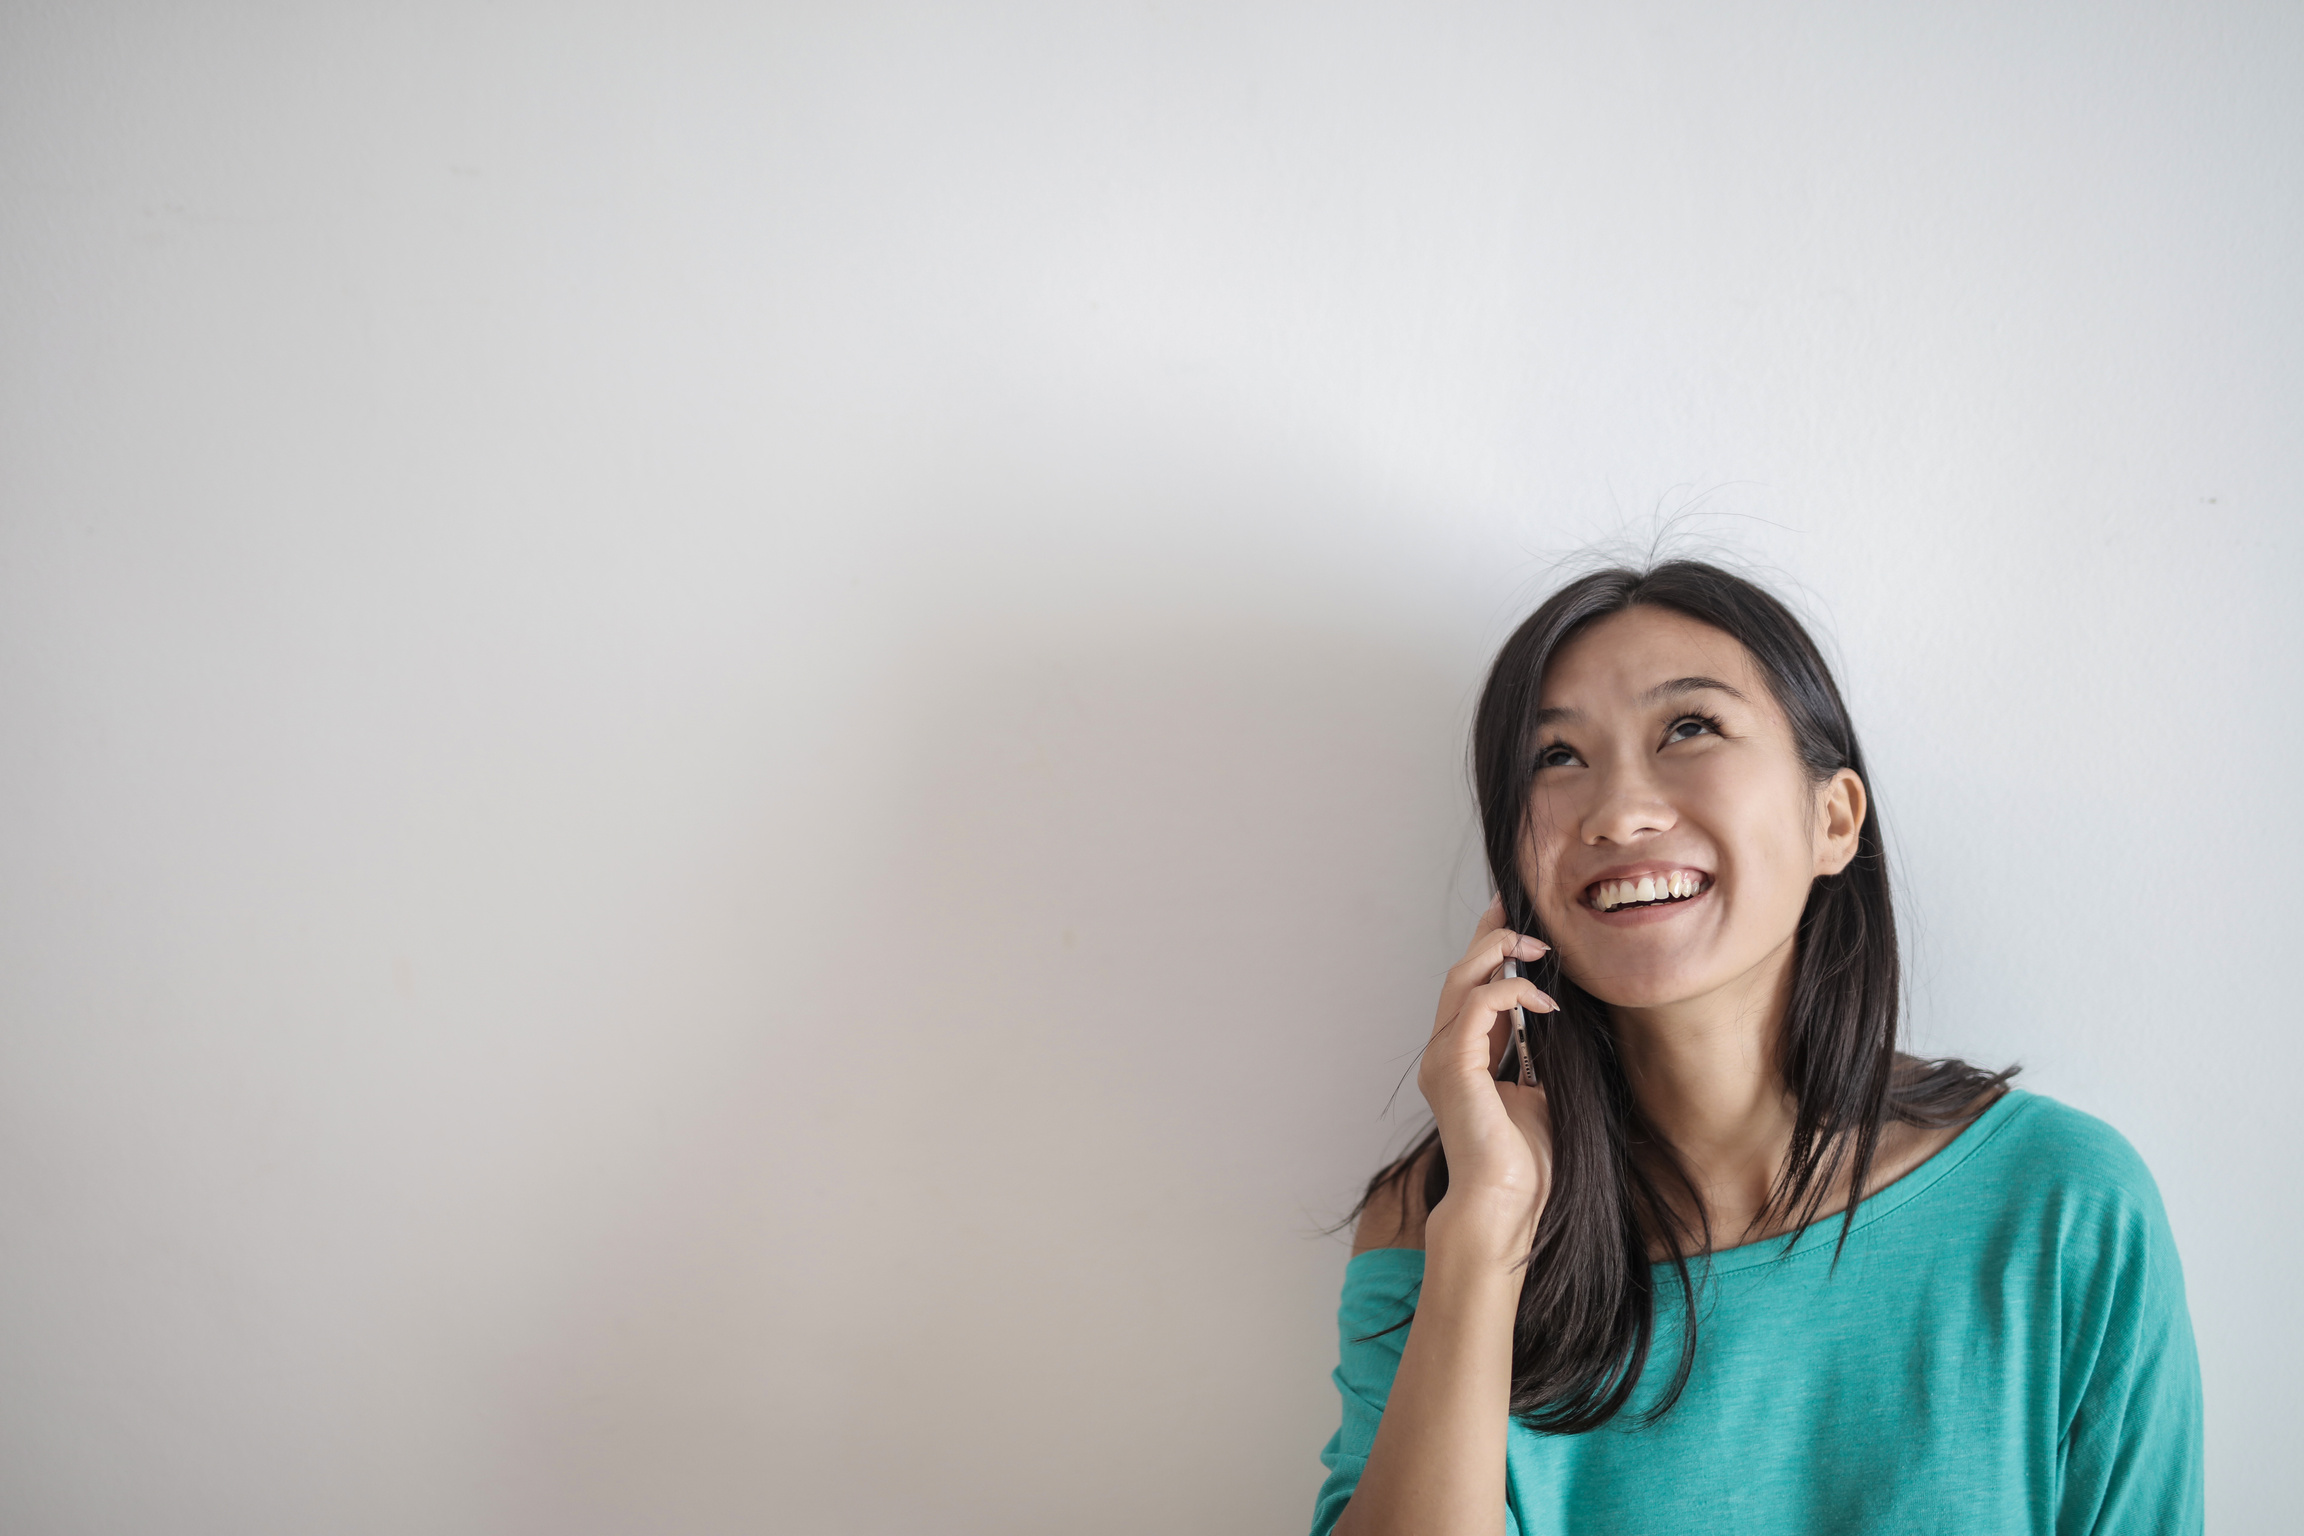 Portrait Photo of Smiling Woman in a Teal Top Talking on the Phone